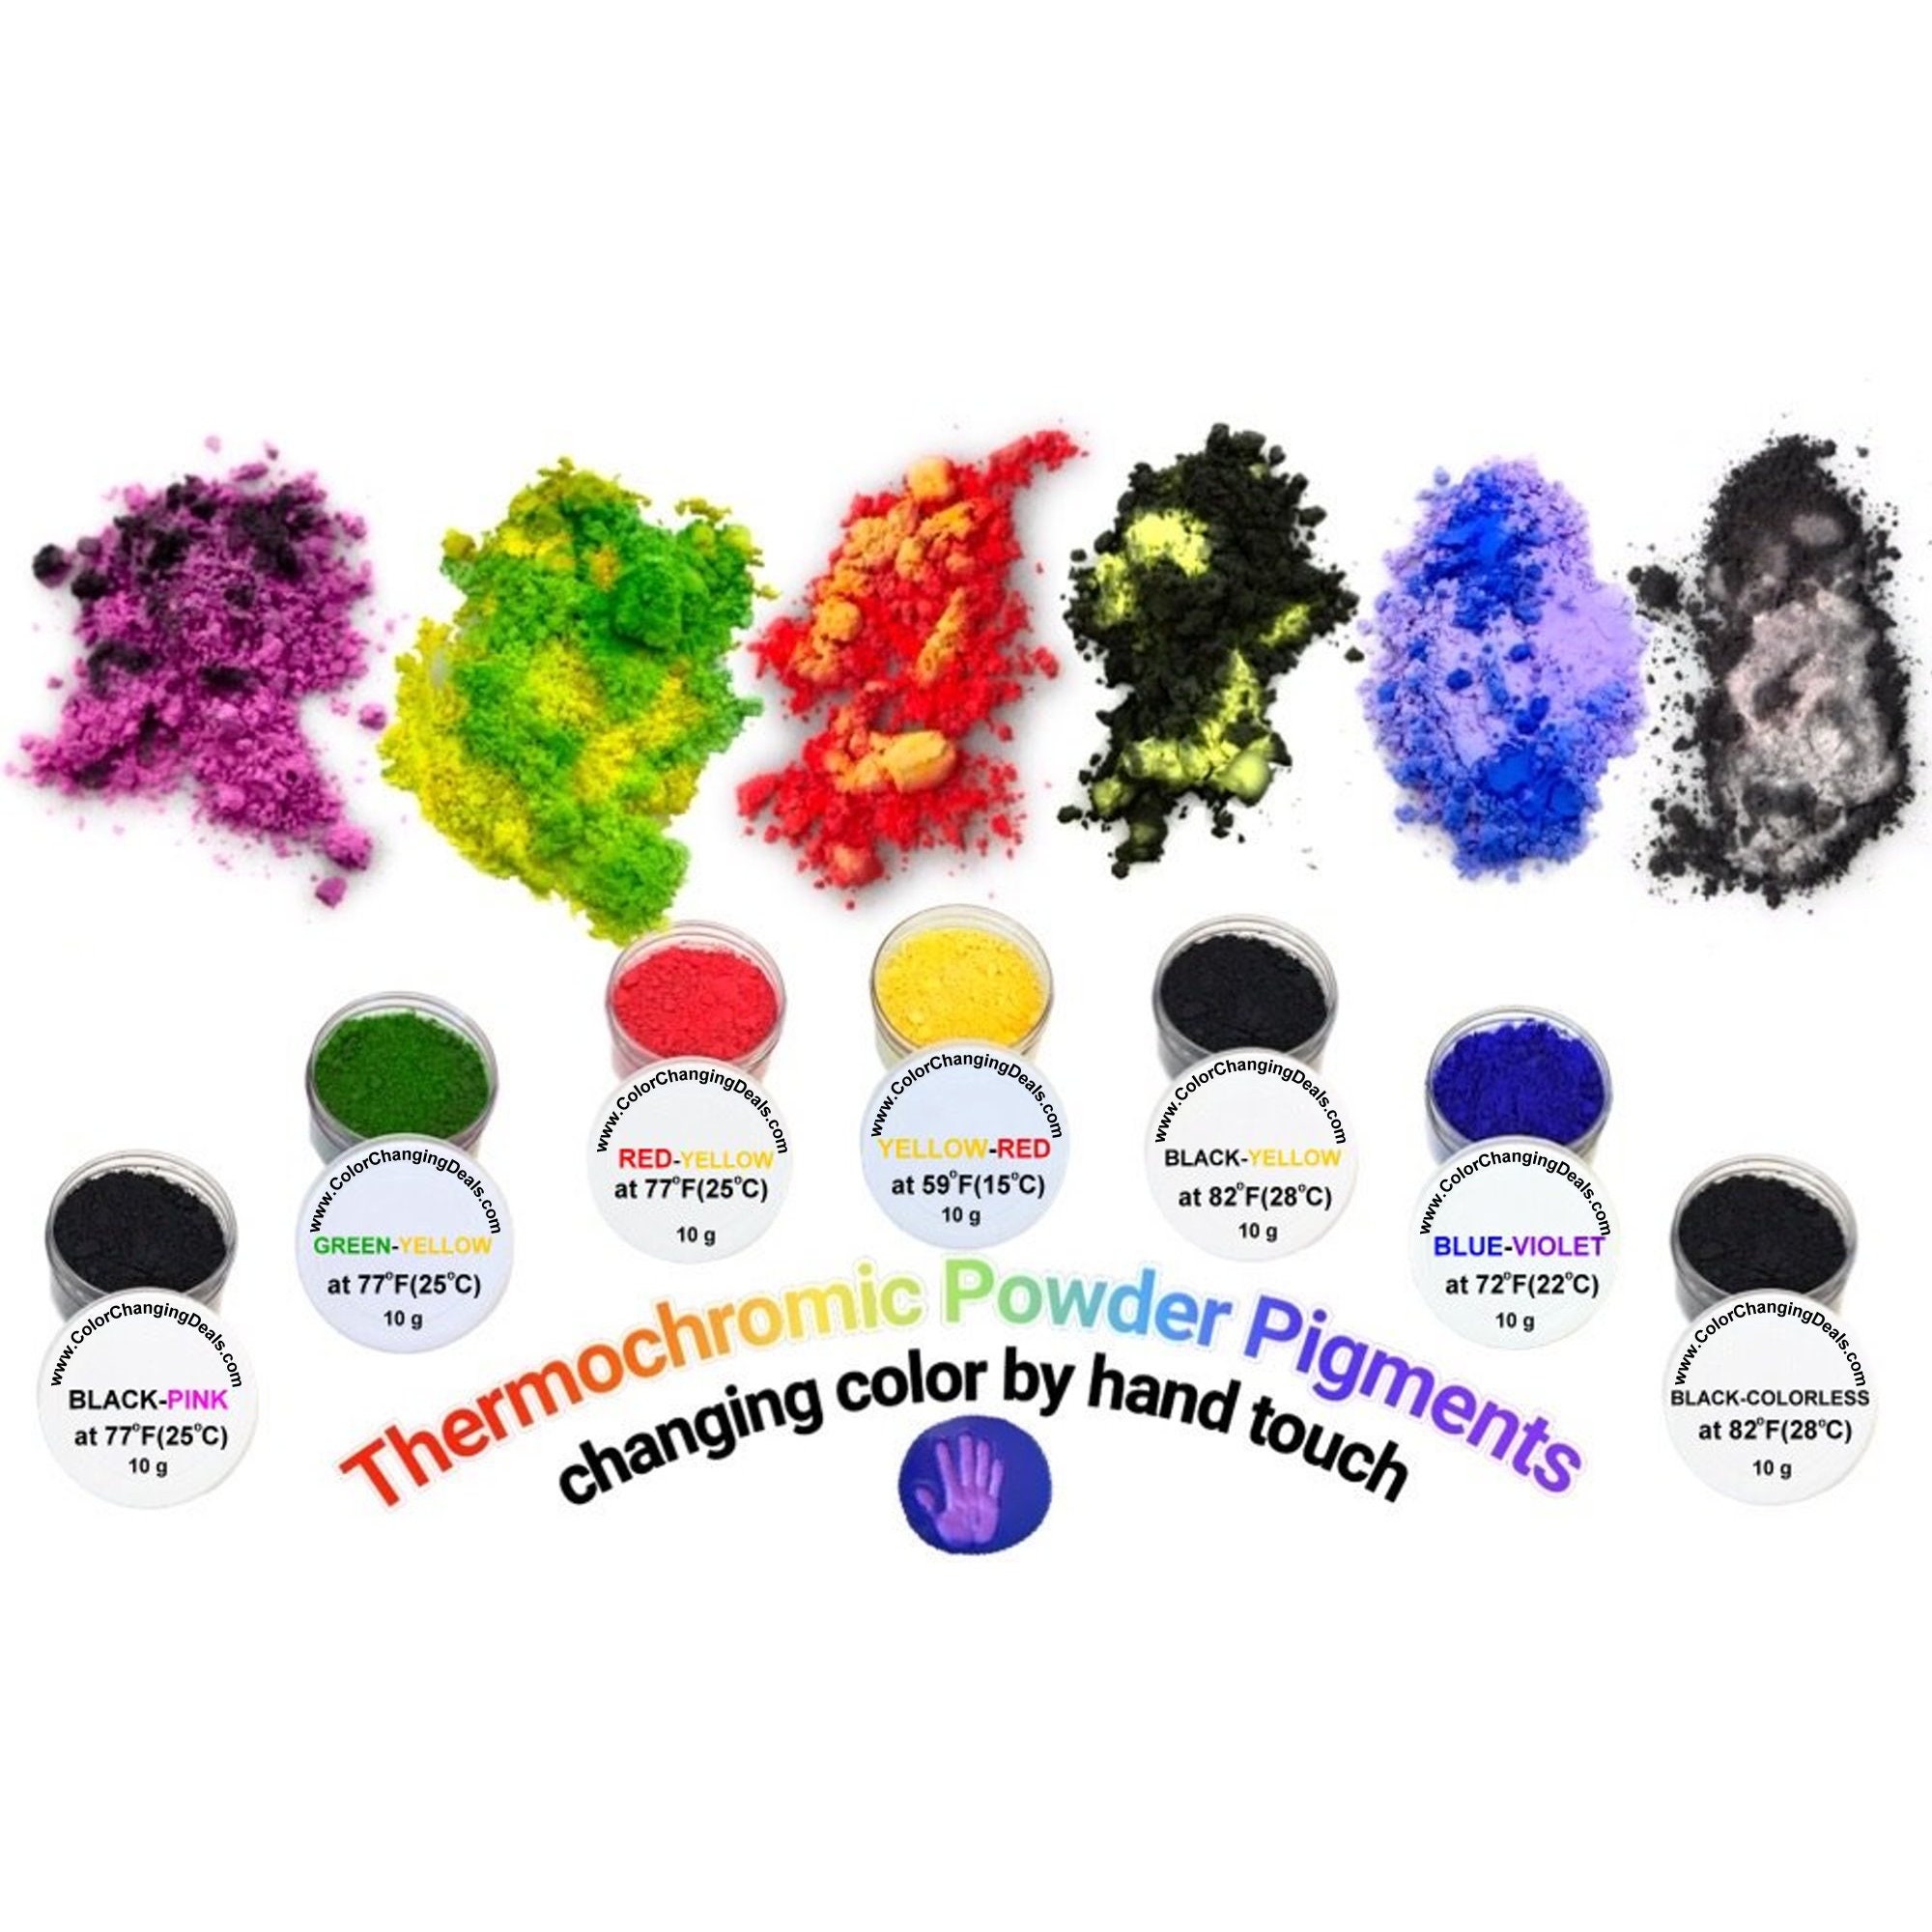 10g Bottle Opaque Resin Pigment Colorants, UV Resin, Epoxy Resin, Color  Dyes for Resin Choose From 20 Colors 